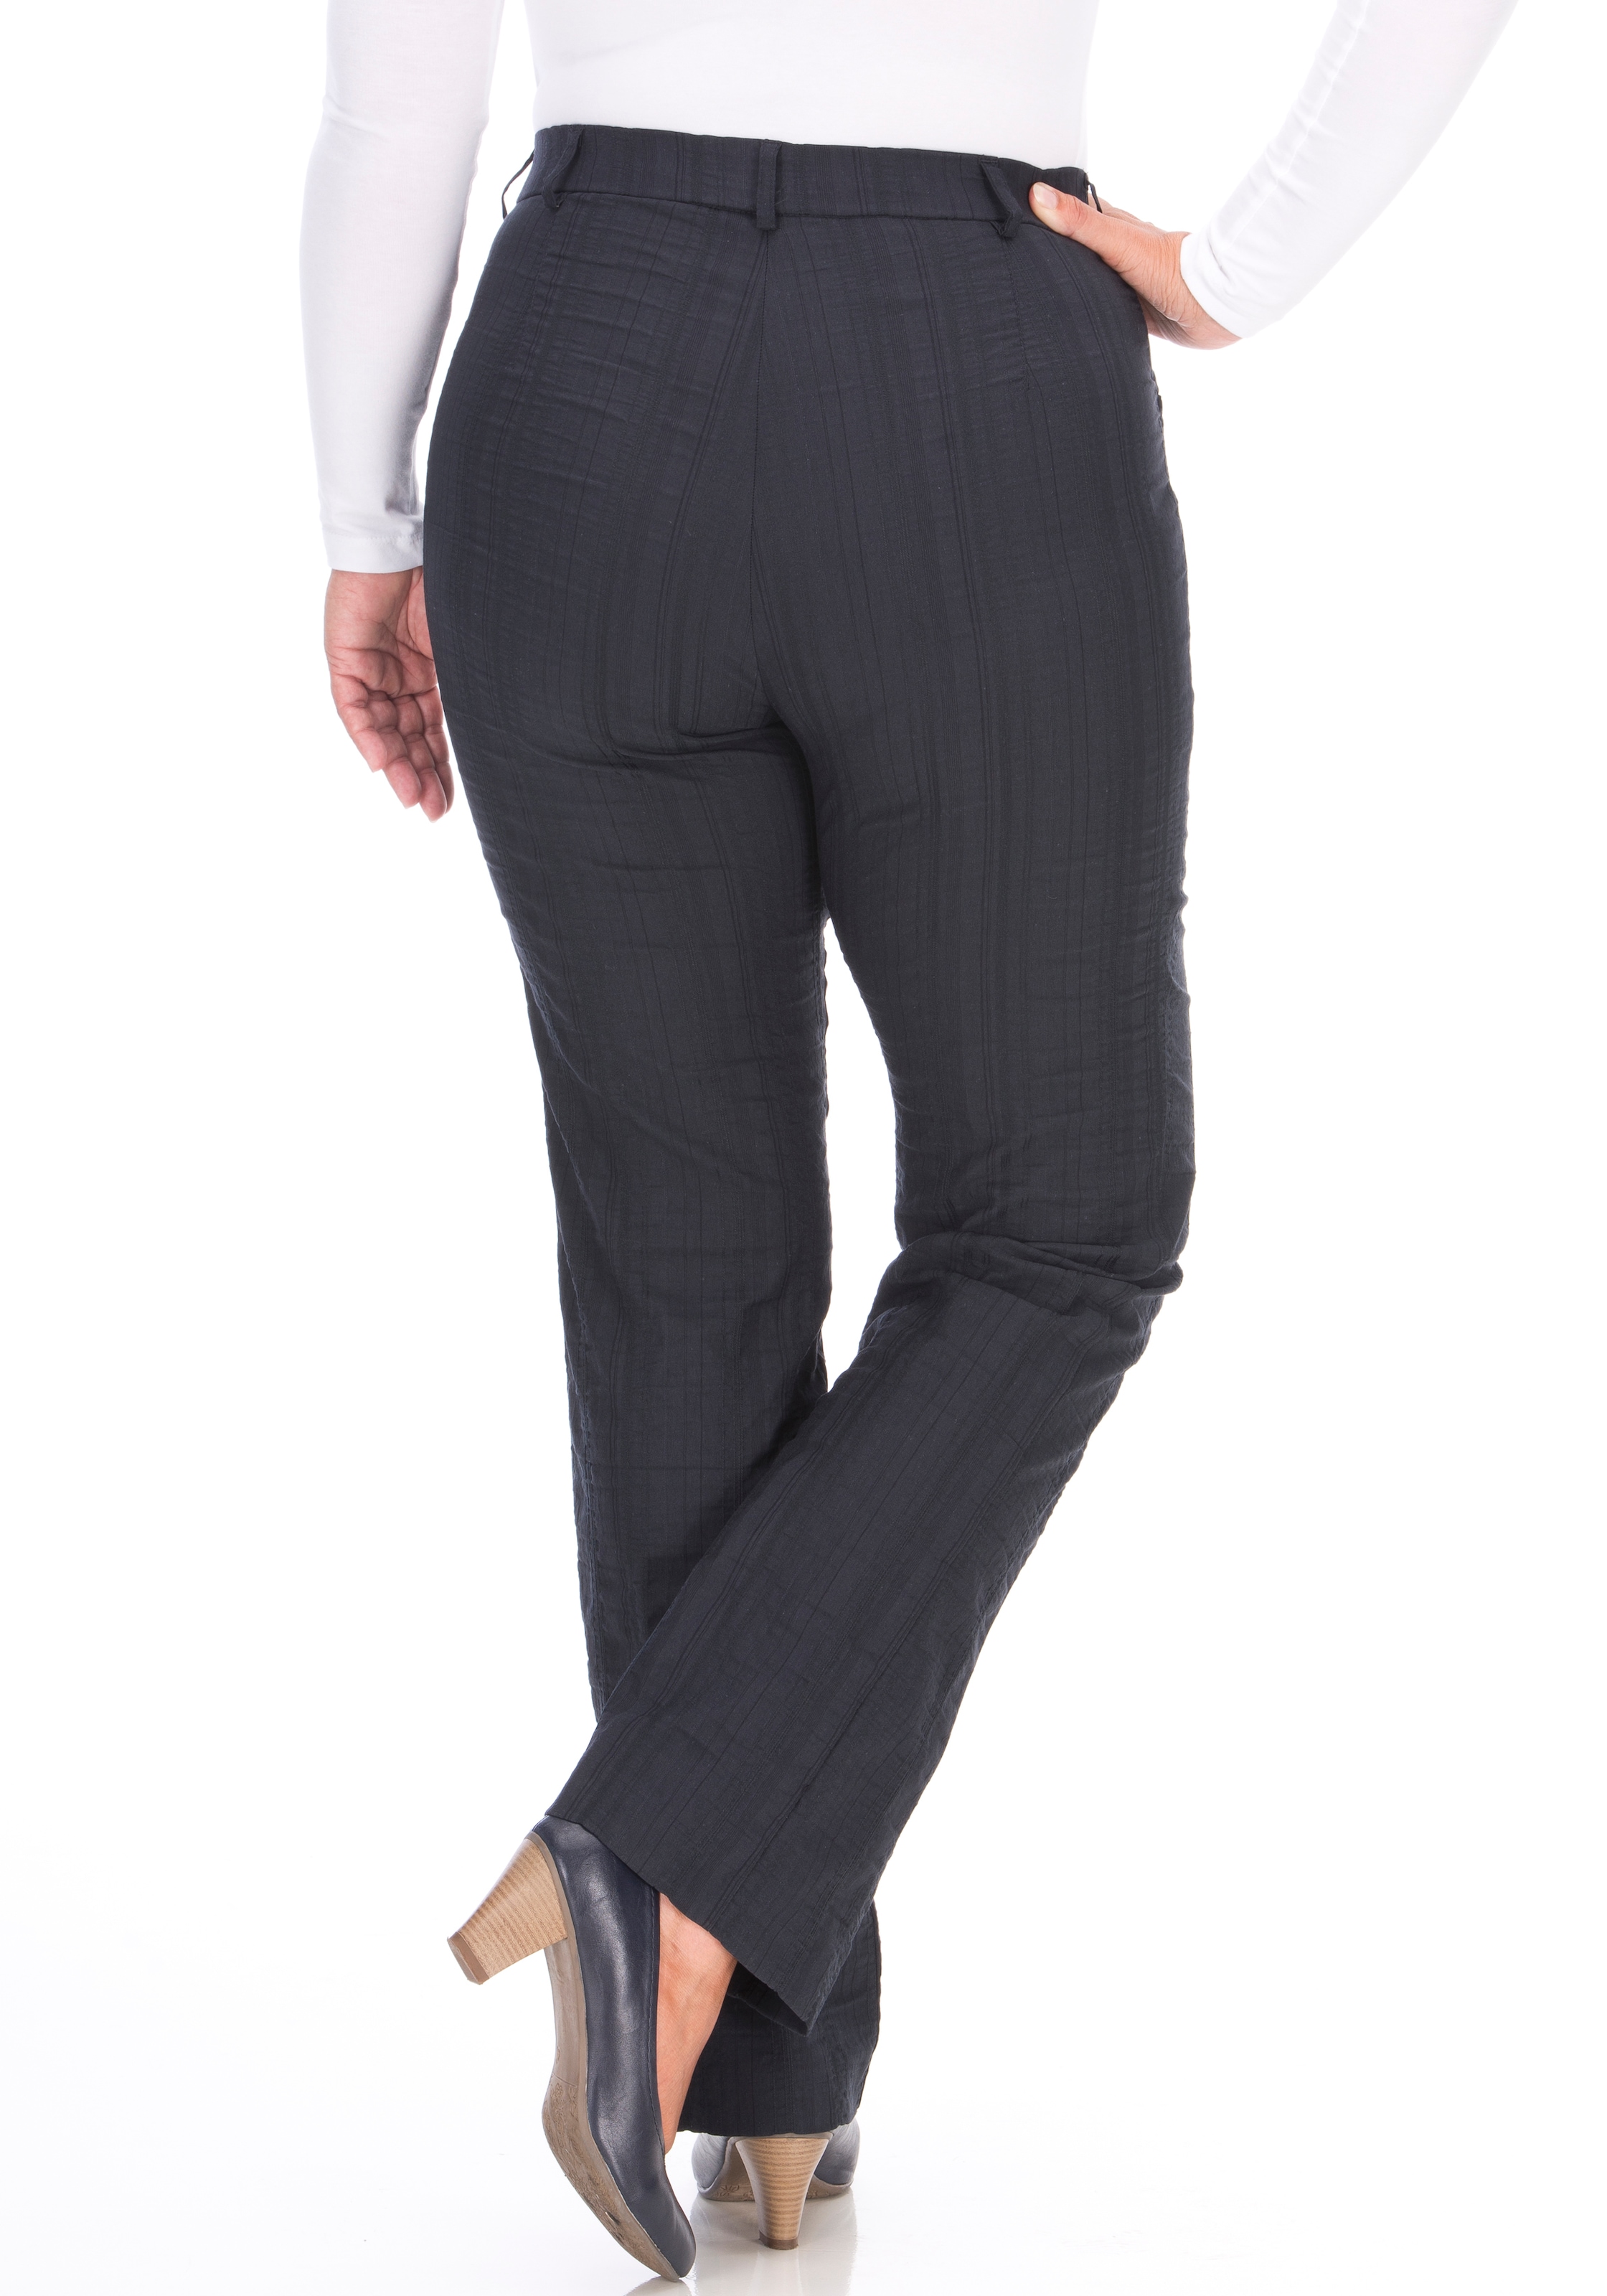 ♕ Stoffhose KjBRAND Quer-Stretch bei in optimale »Bea«, Passform